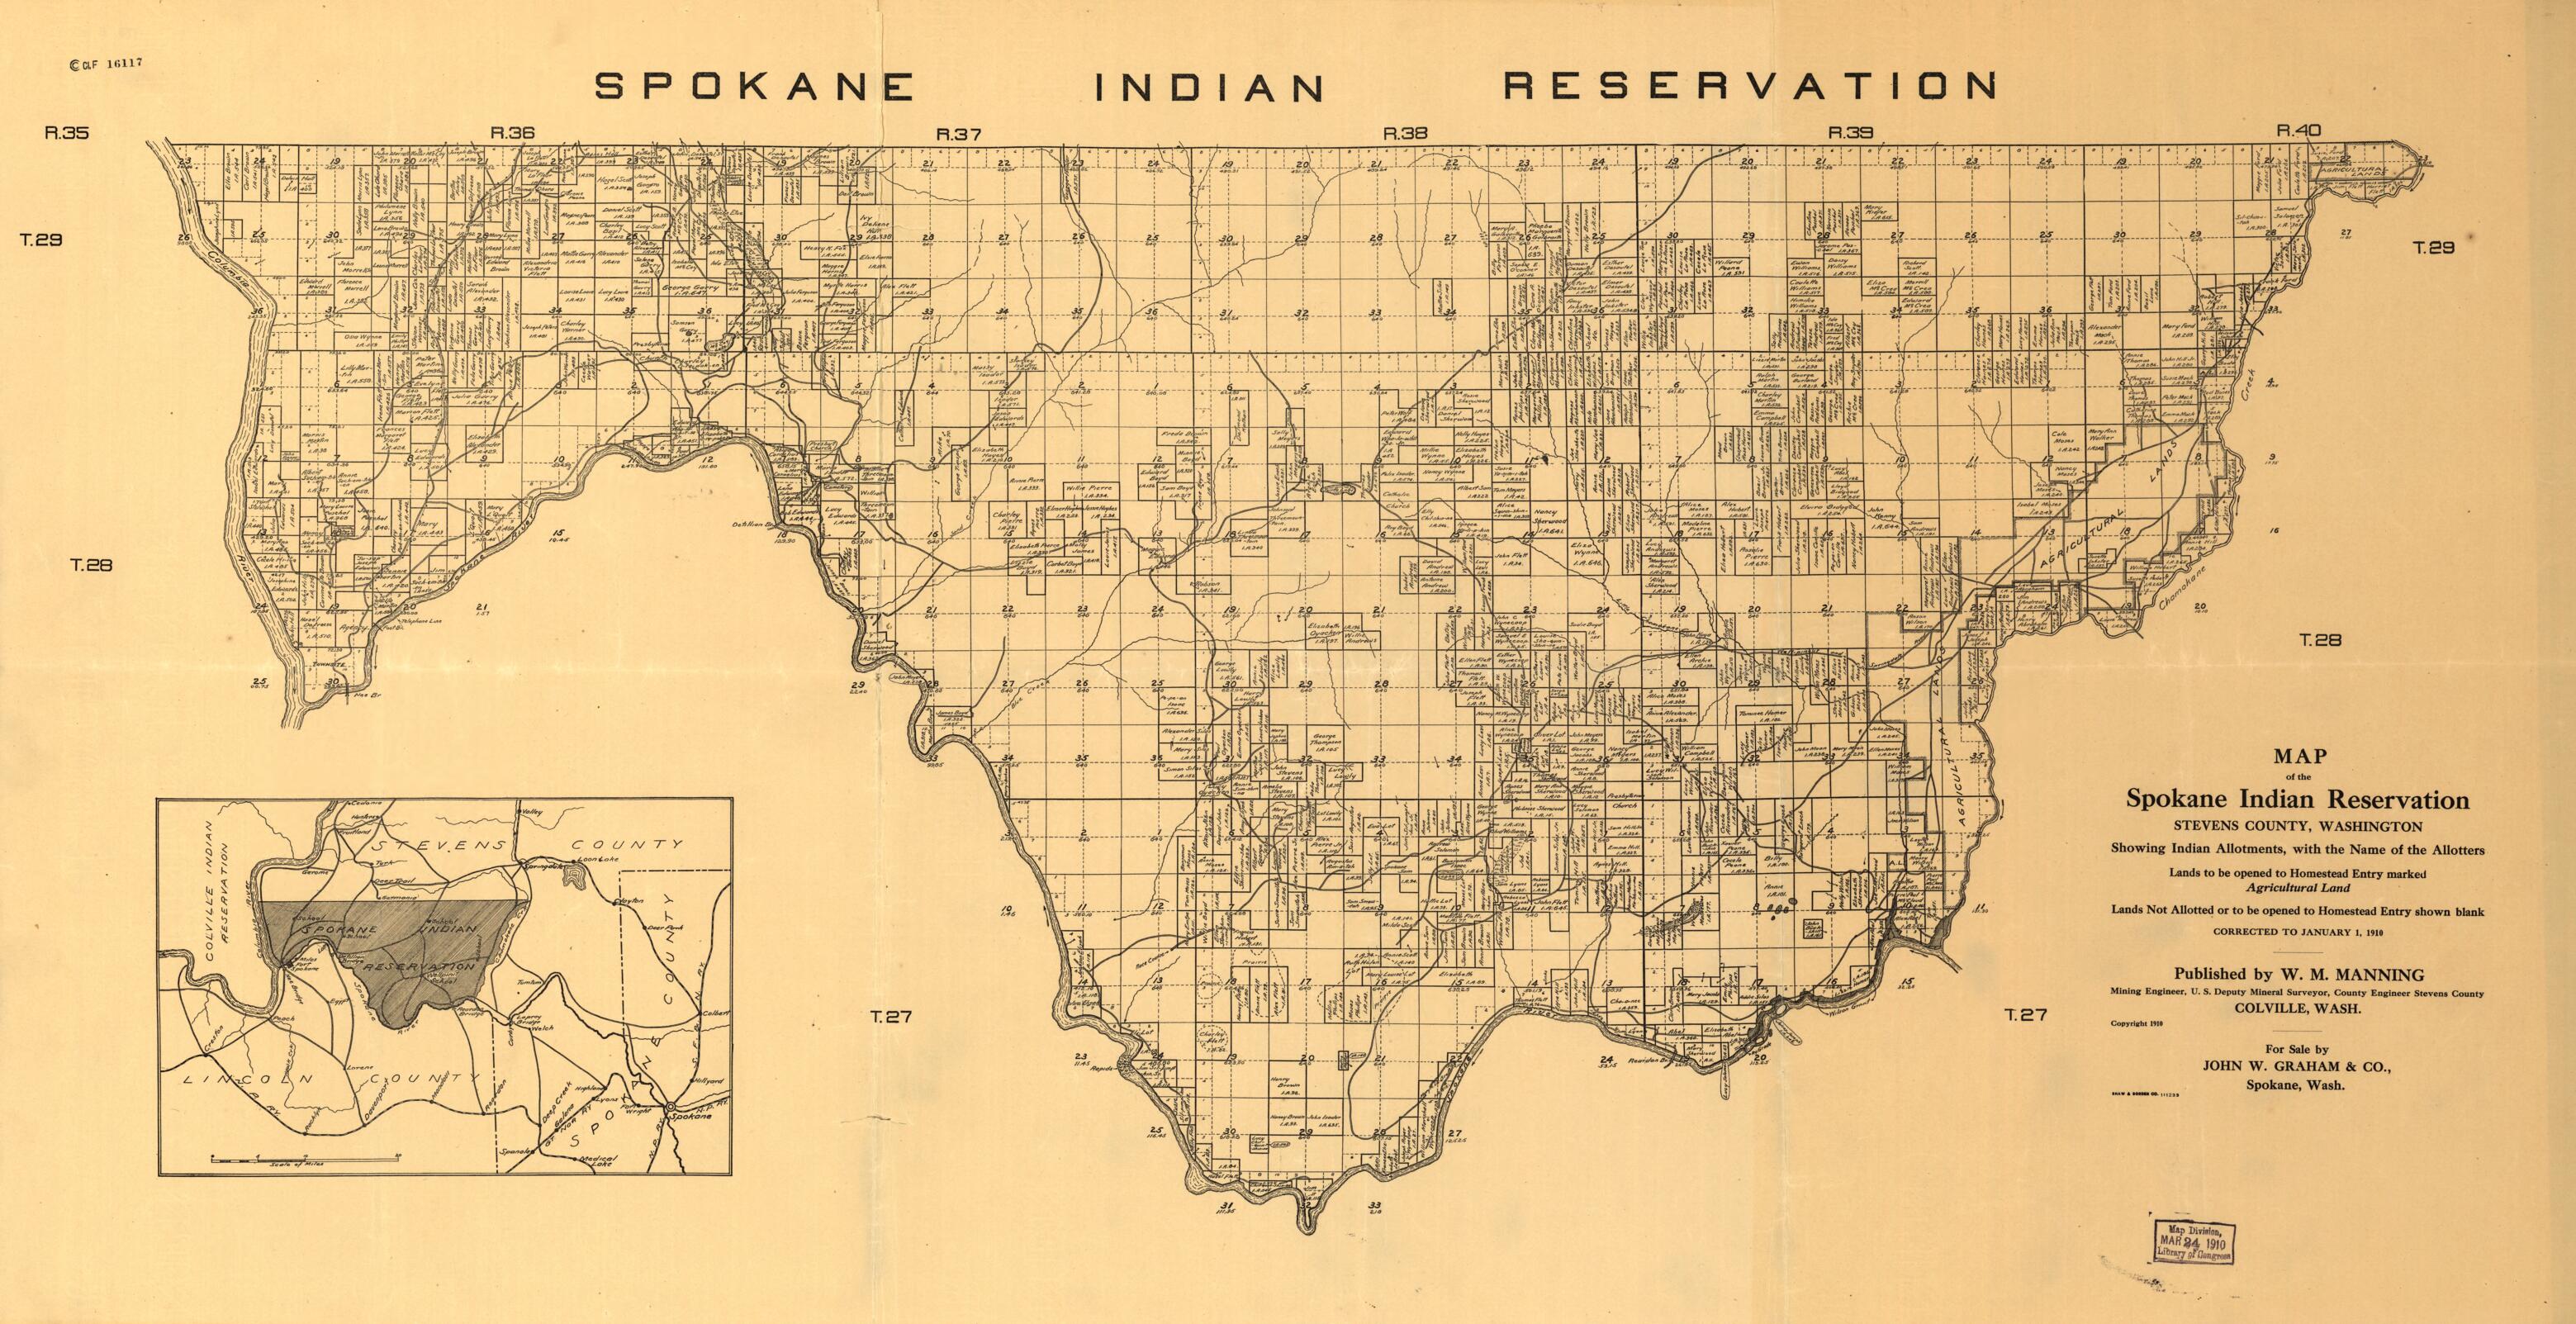 This old map of Map of the Spokane Indian Reservation, Stevens County, Washington from 1910 was created by W. M. Manning in 1910